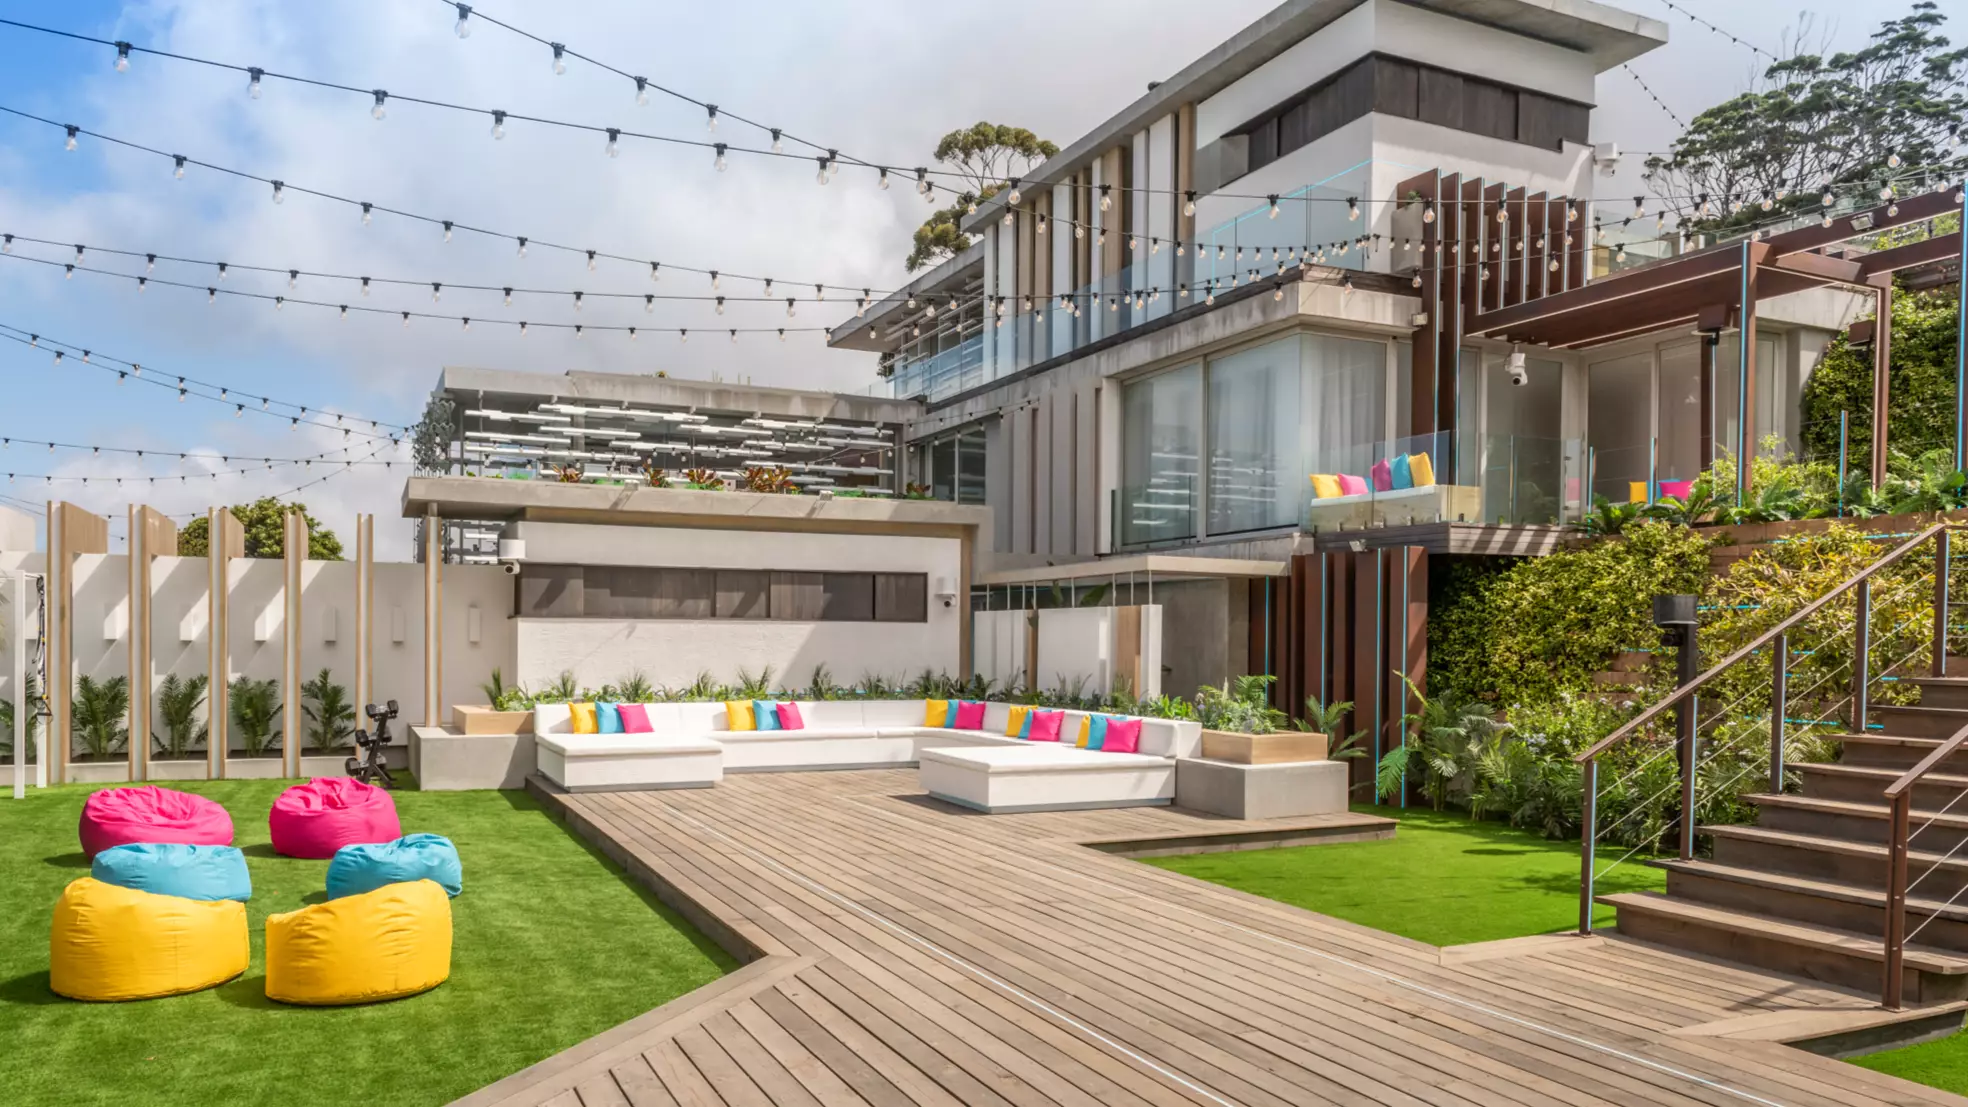 First Look At The 'Love Island' Villa With New Rooms Including 'Dog House' And A Boys' Dressing Room